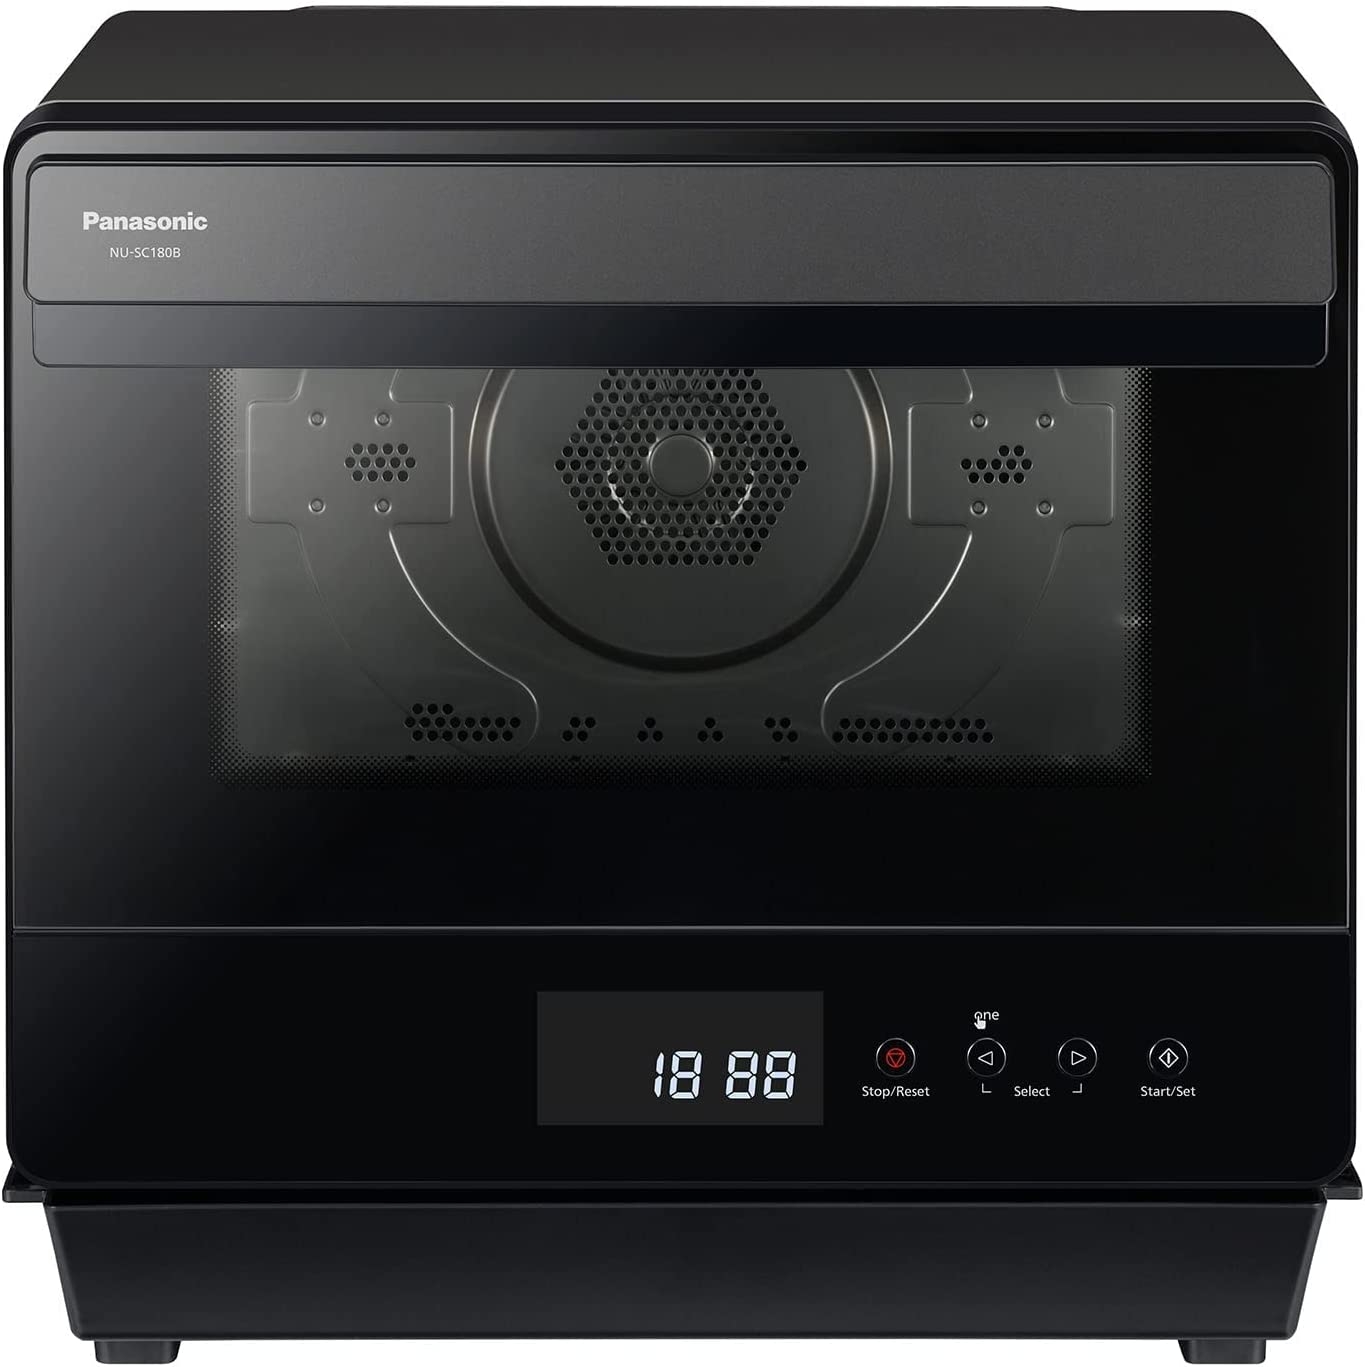 Panasonic HomeChef 7-in-1 Compact Oven with Convection Bake, Airfryer, Steam, Slow Cook, Ferment, 1200 watts, .7 cu ft with Easy